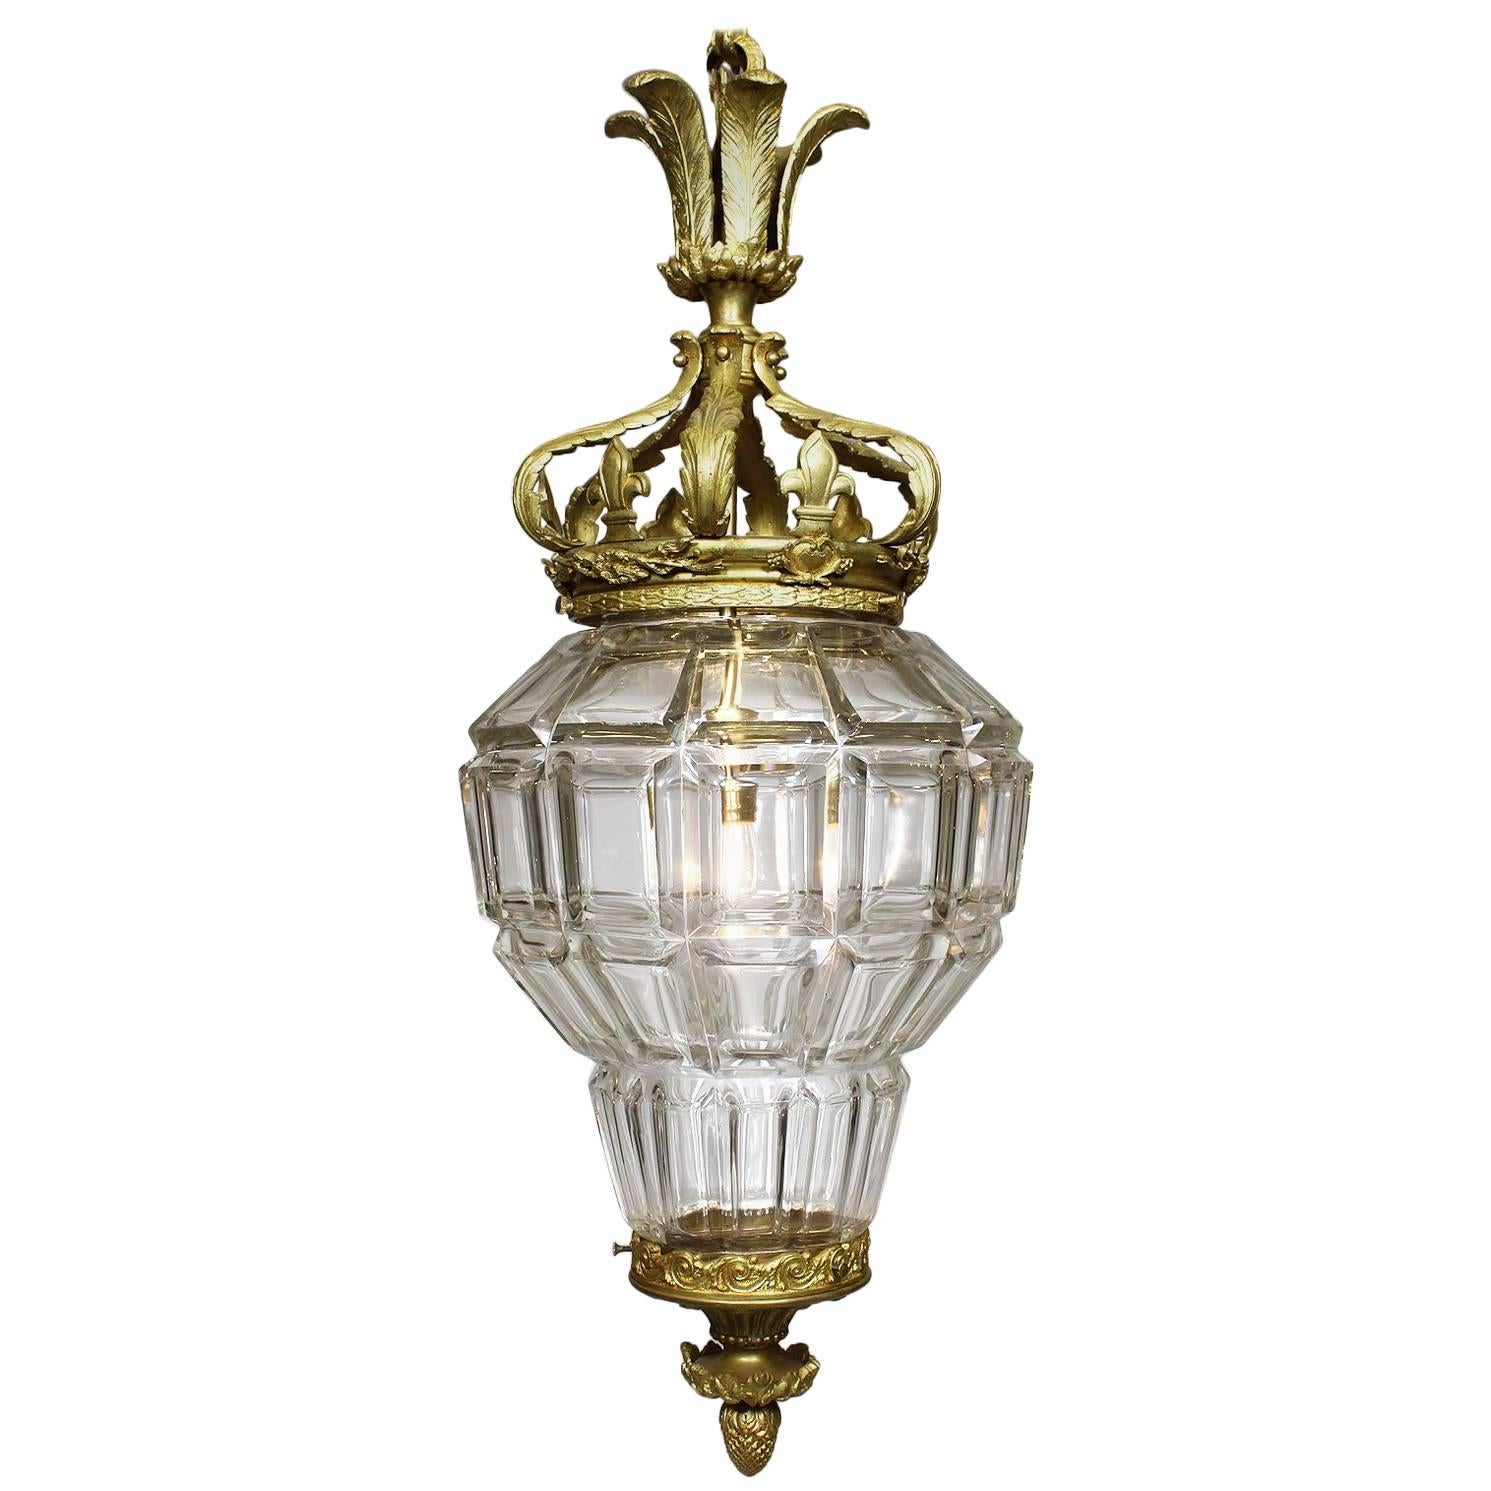 French 19th-20th Century Gilt-Bronze and Cut-Glass "Versailles" Style Lantern